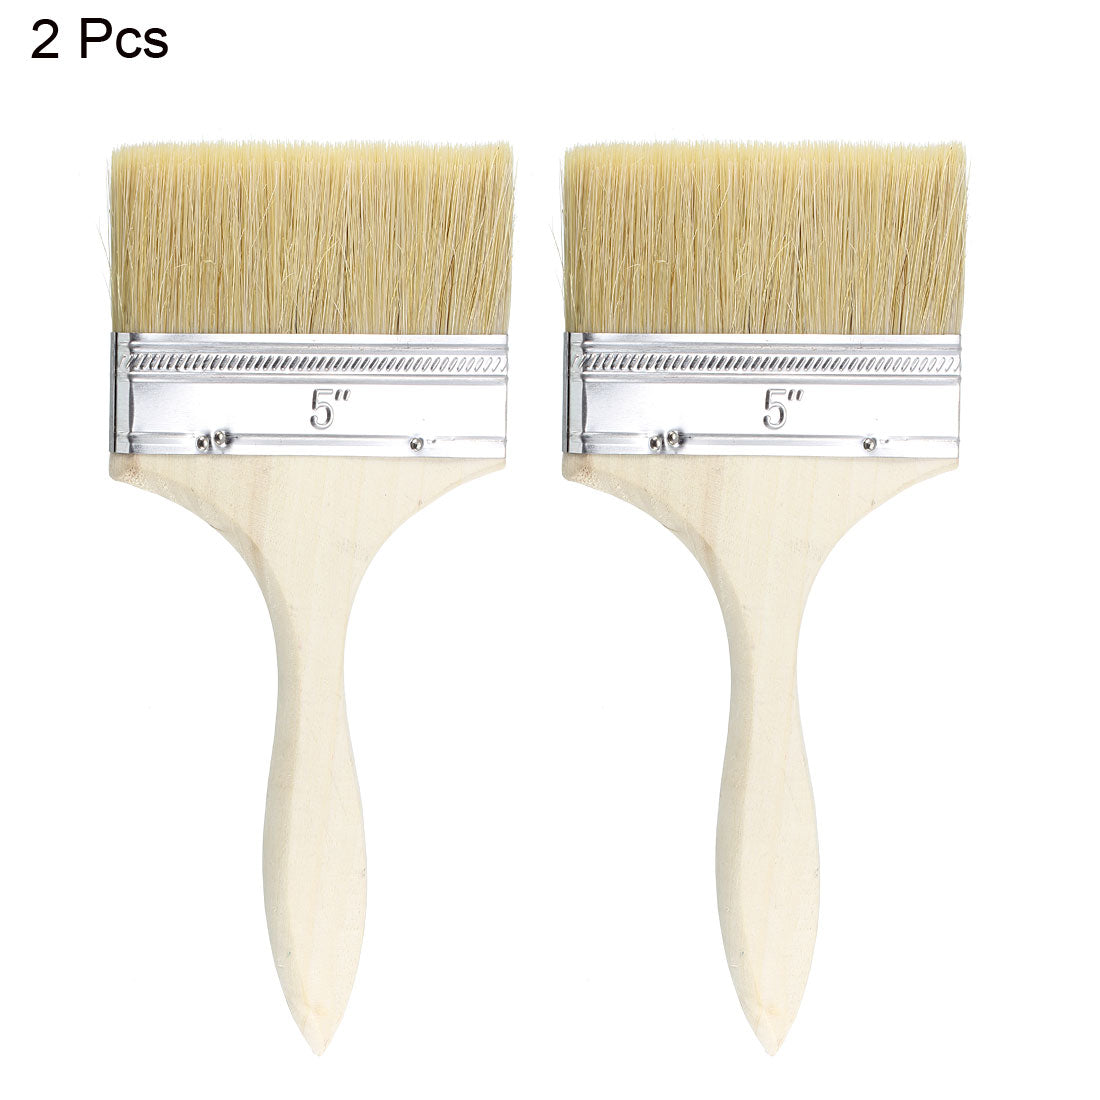 uxcell Uxcell 5 Inch Chip Paint Brush Synthetic Bristle with Wooden Grip for Wall Treatment 2pcs